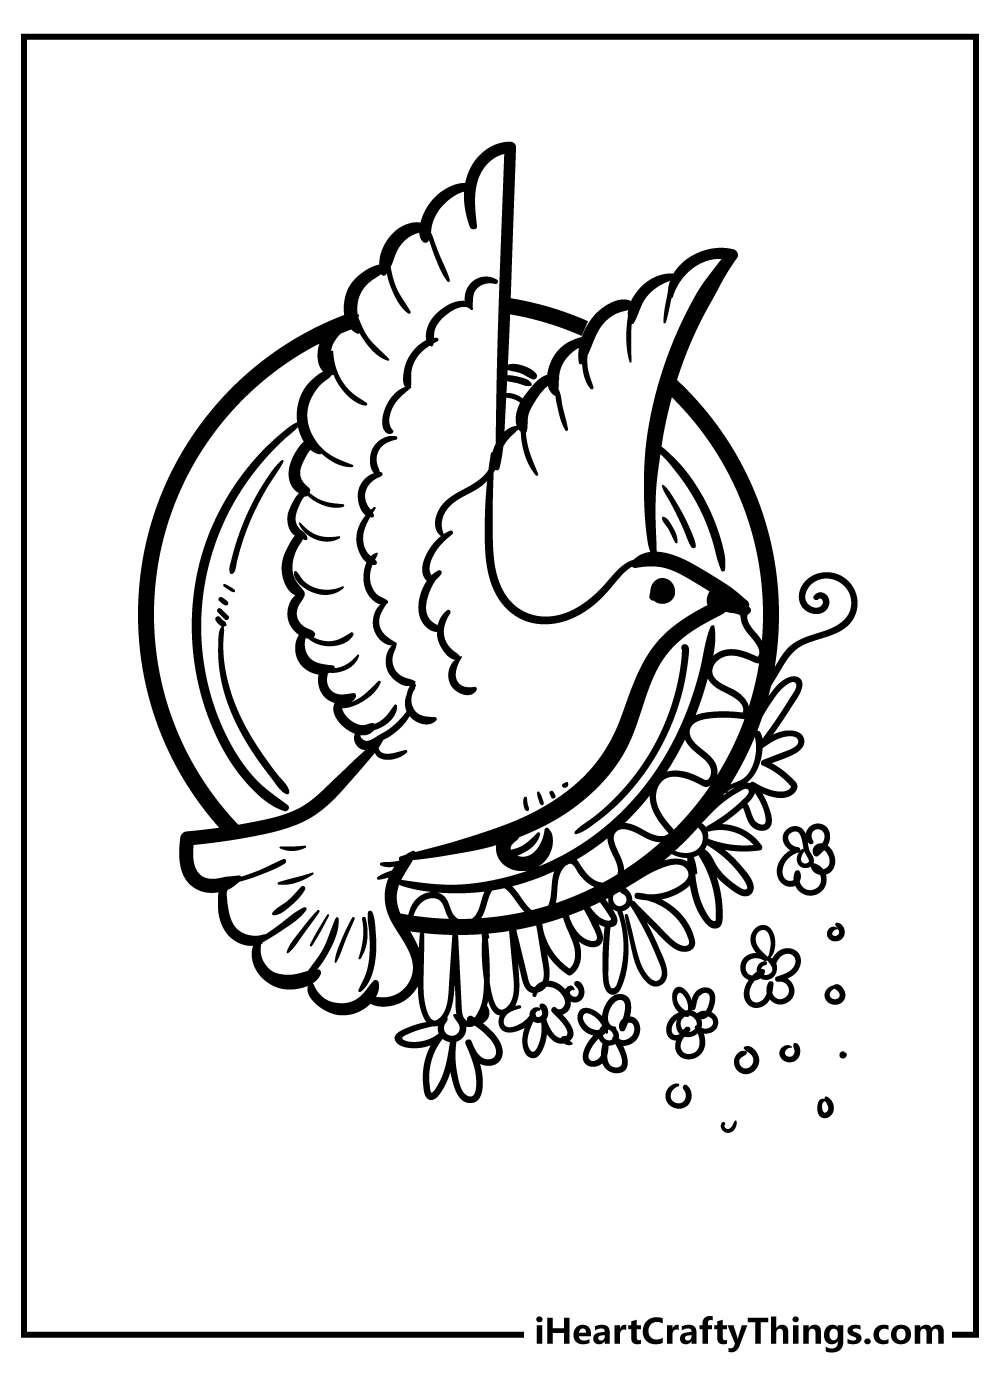 Peace Coloring Book for adults free download